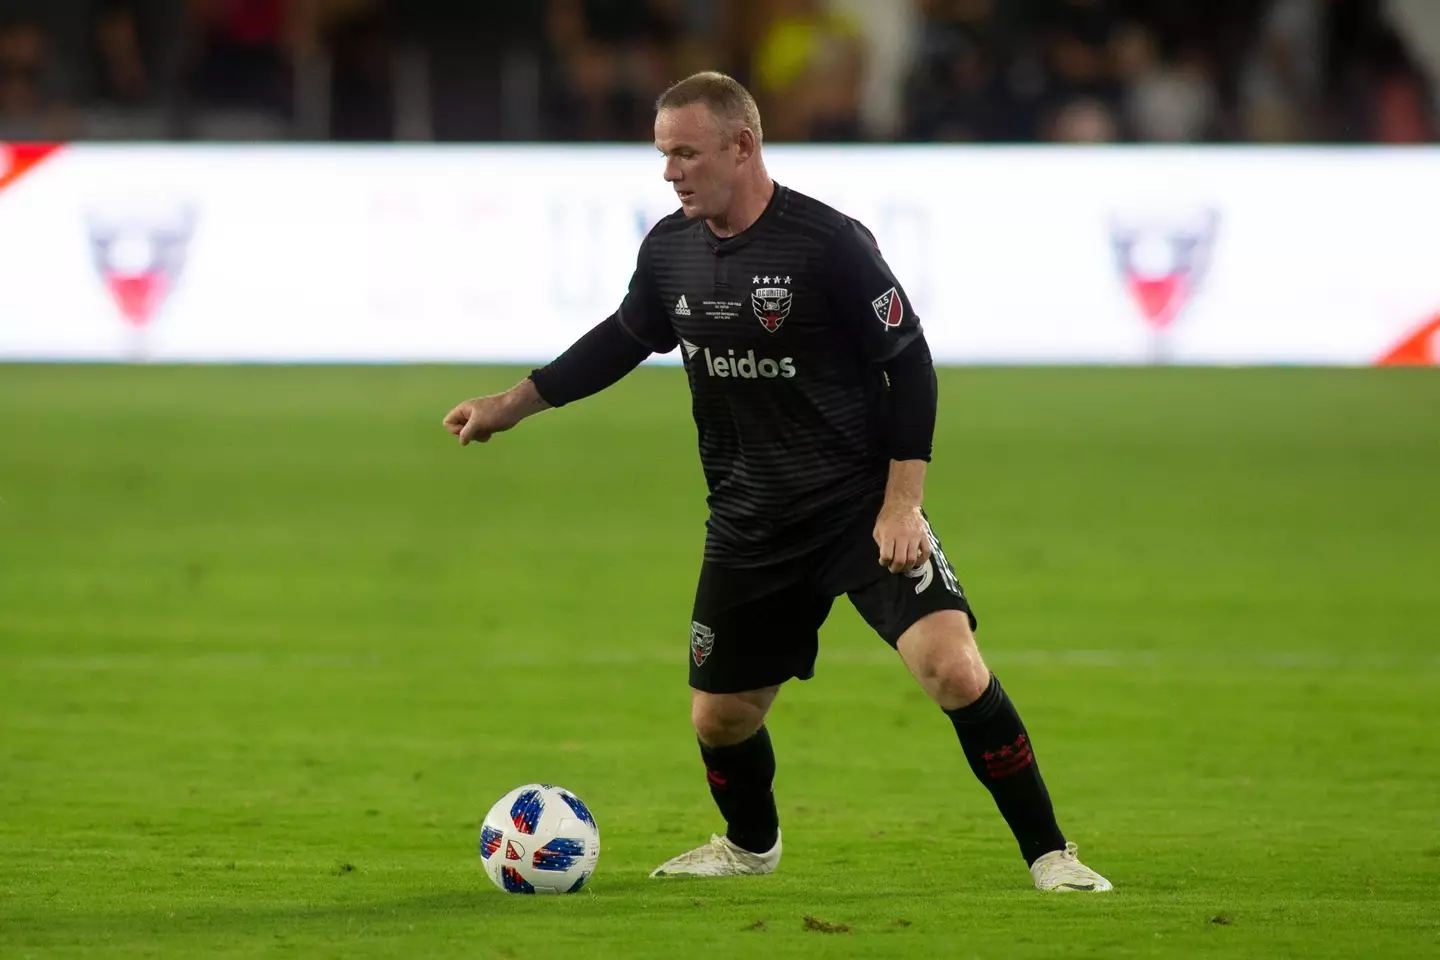 Wayne Rooney in action for DC United in 2018. Image